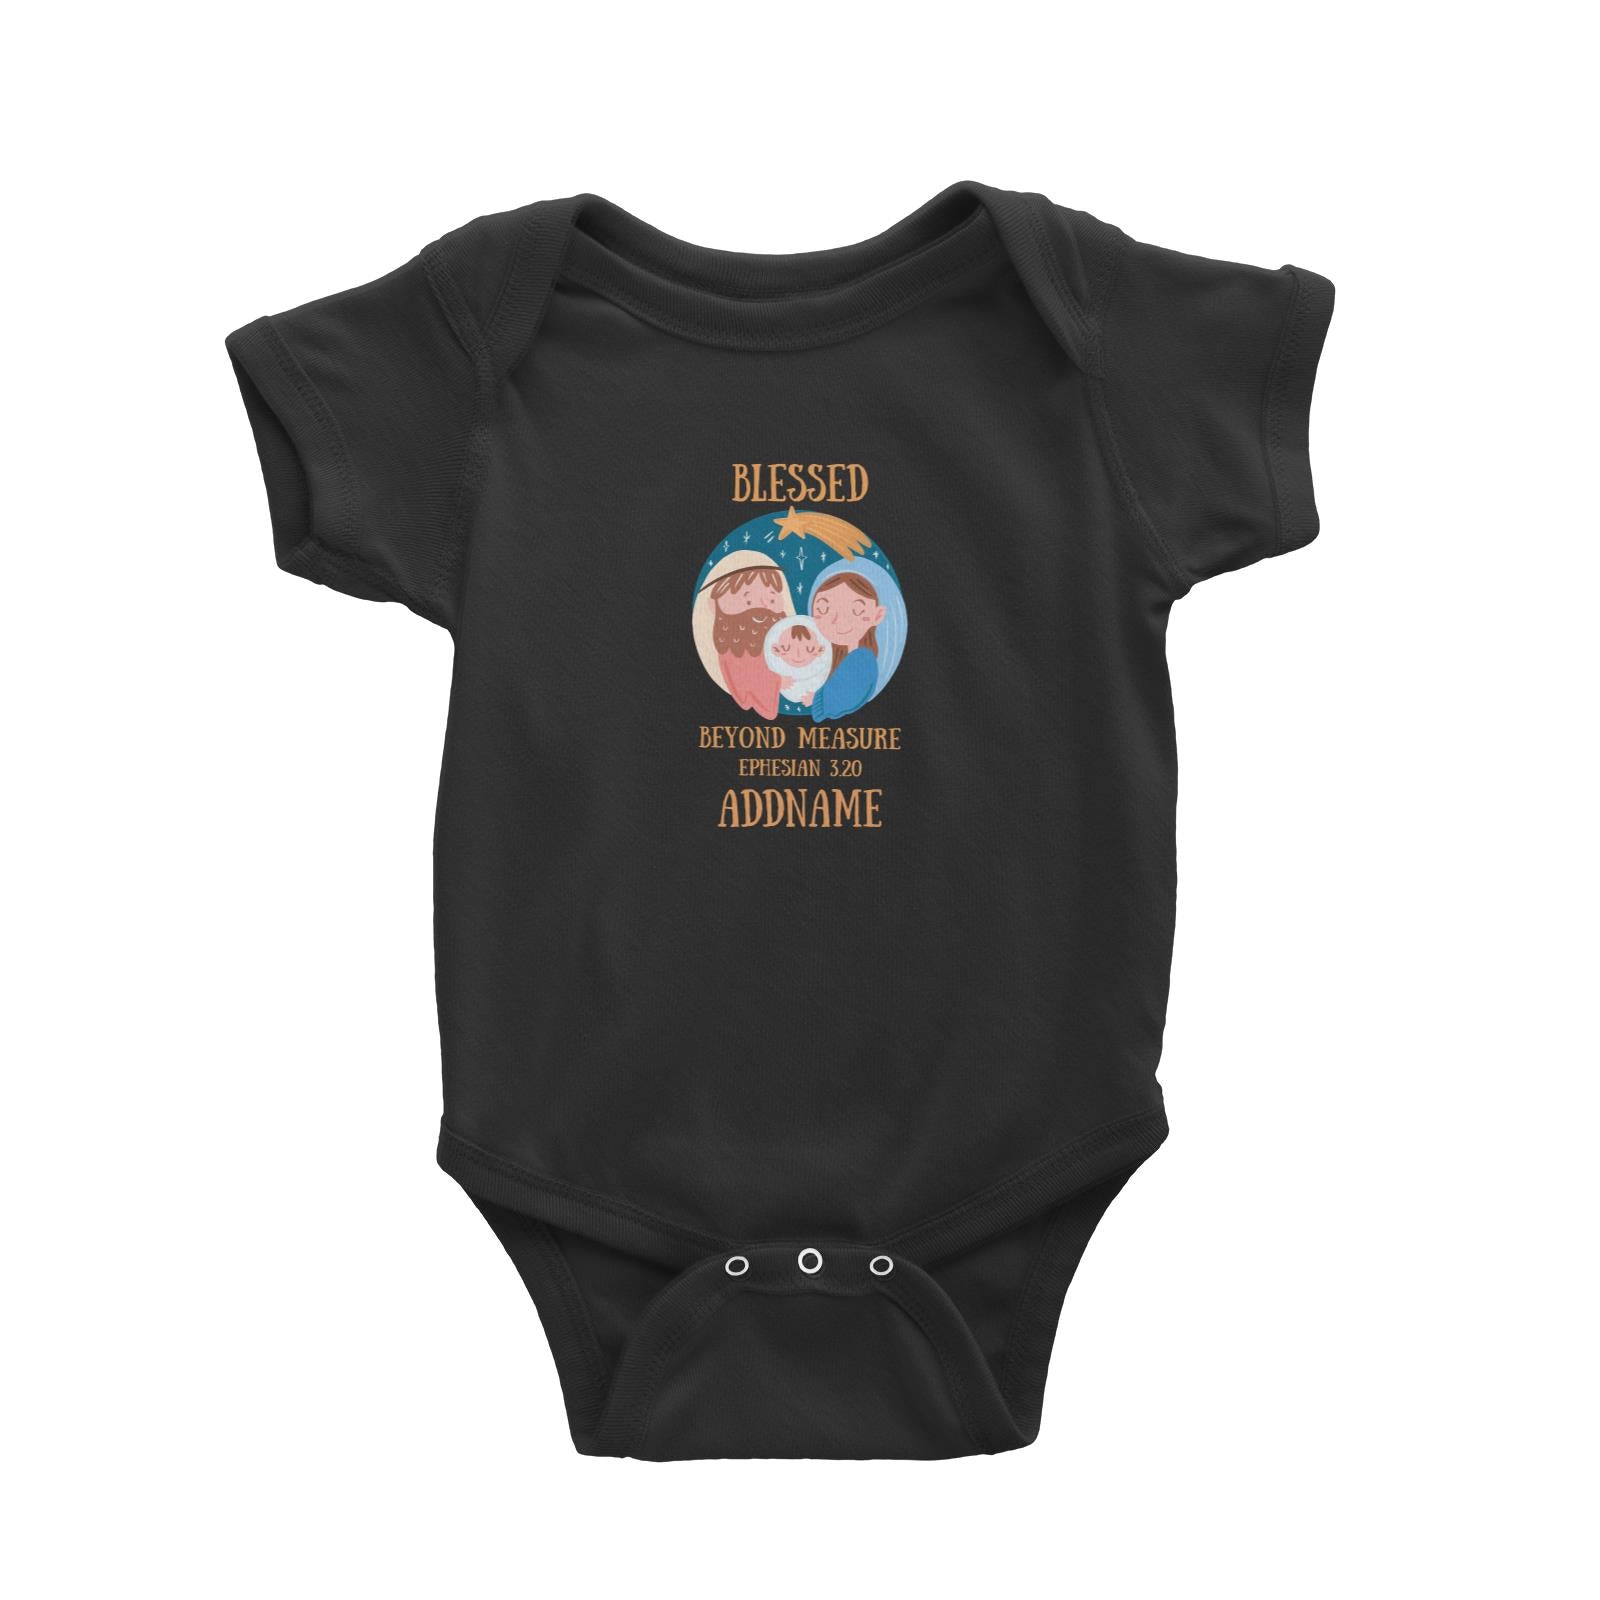 Gods GIft Blessed Beyond Measure Ephesian 3.20 Addname Baby Romper